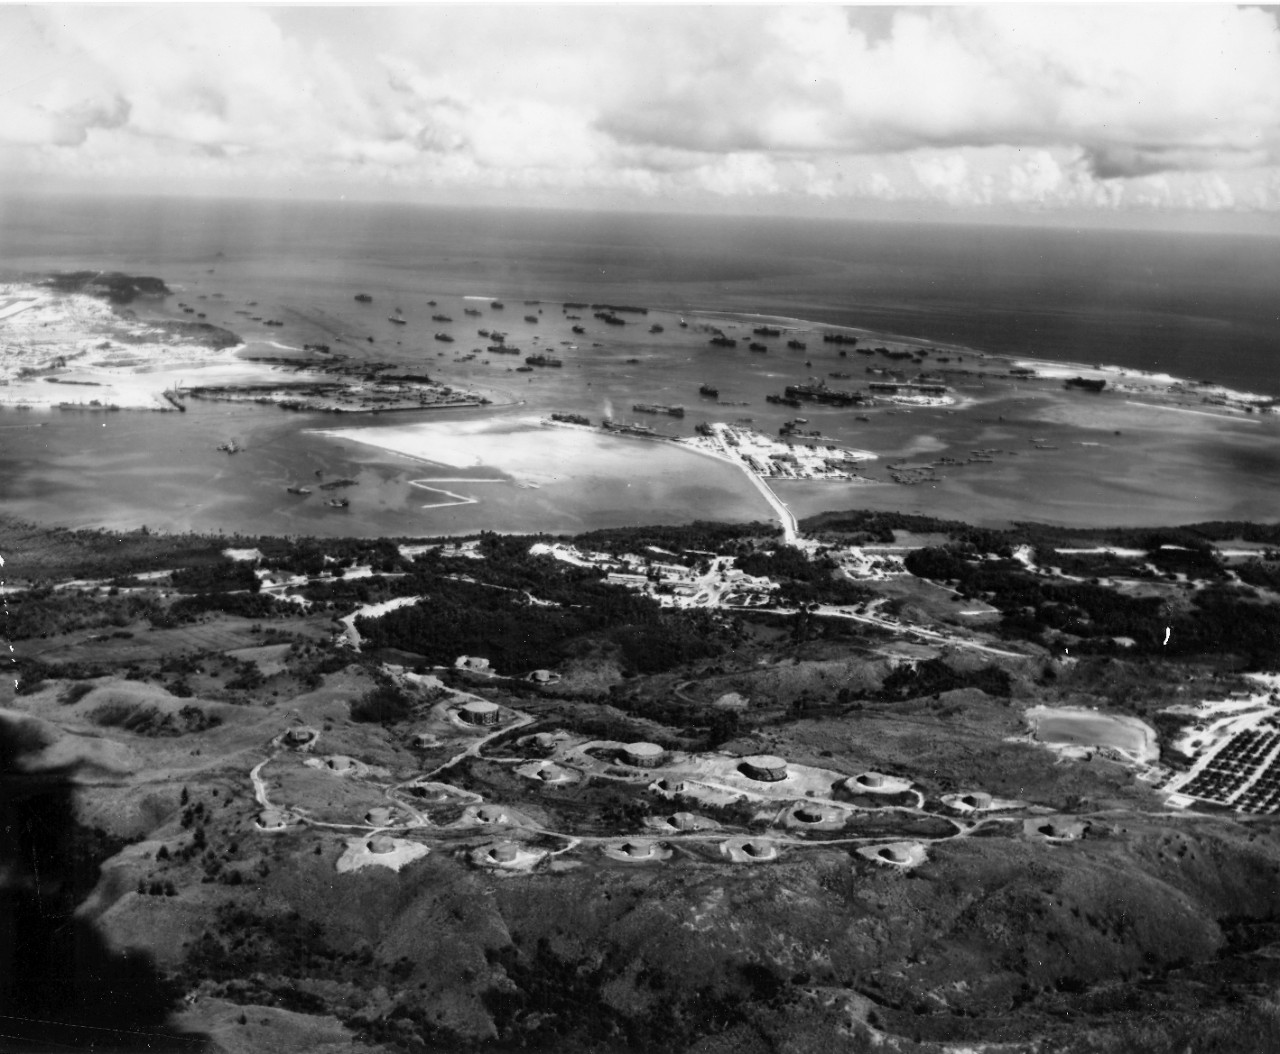 Fuel branch - an aerial view of man-made causeway wehre tankers discharge oil that is pumped into the black oil tank farm shown in the hills. During the eleven months at Guam, 231,167,000 gallons of black oil were issues by the Fuel Branch. October 20, 1945. 